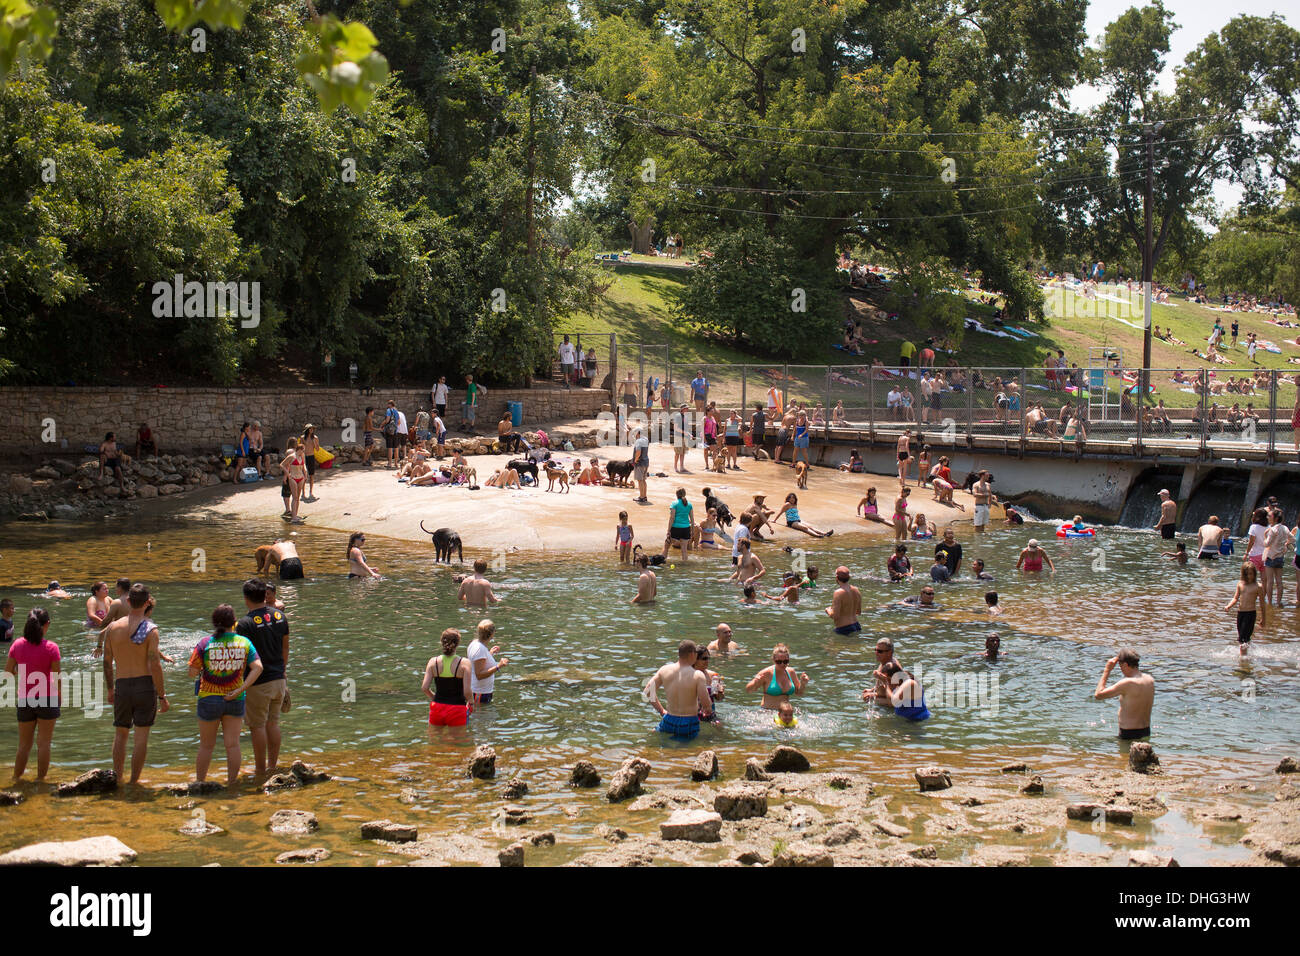 People swim in the outdoor swimming pool at Barton Springs Pool in Austin, Texas, on a hot sunny summer day. Stock Photo